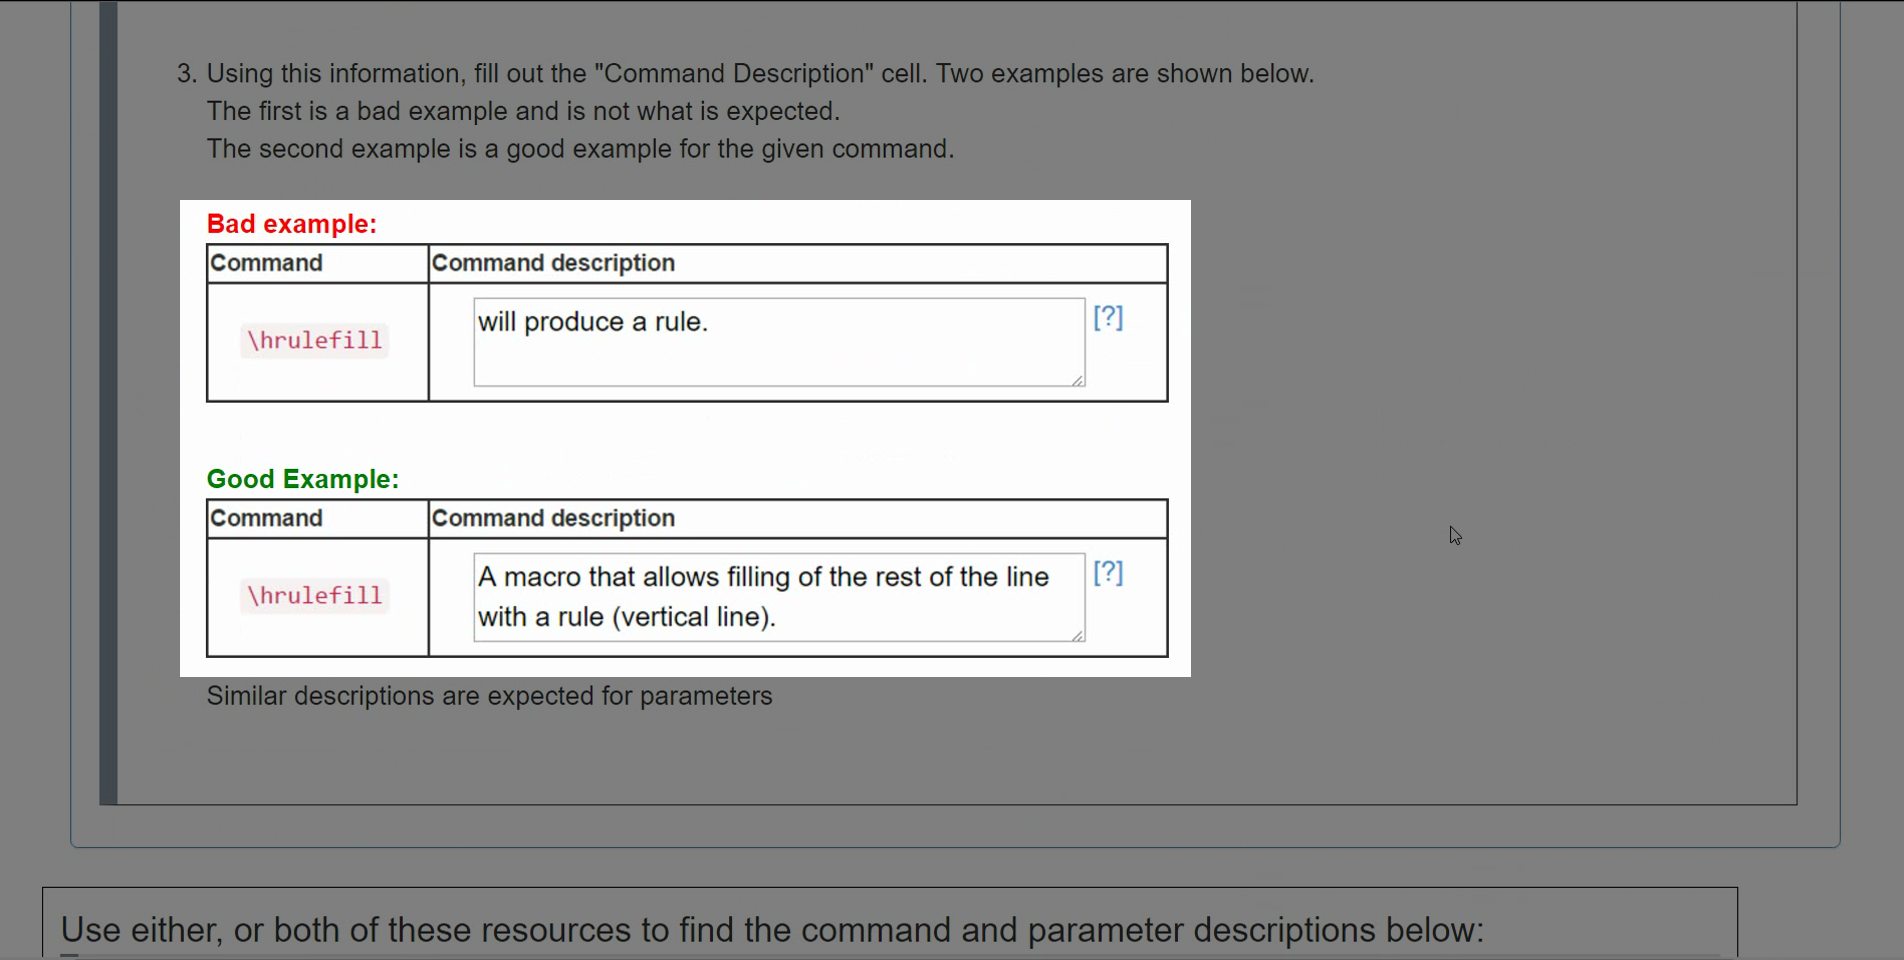 Examples of how the descriptions for commands should be written